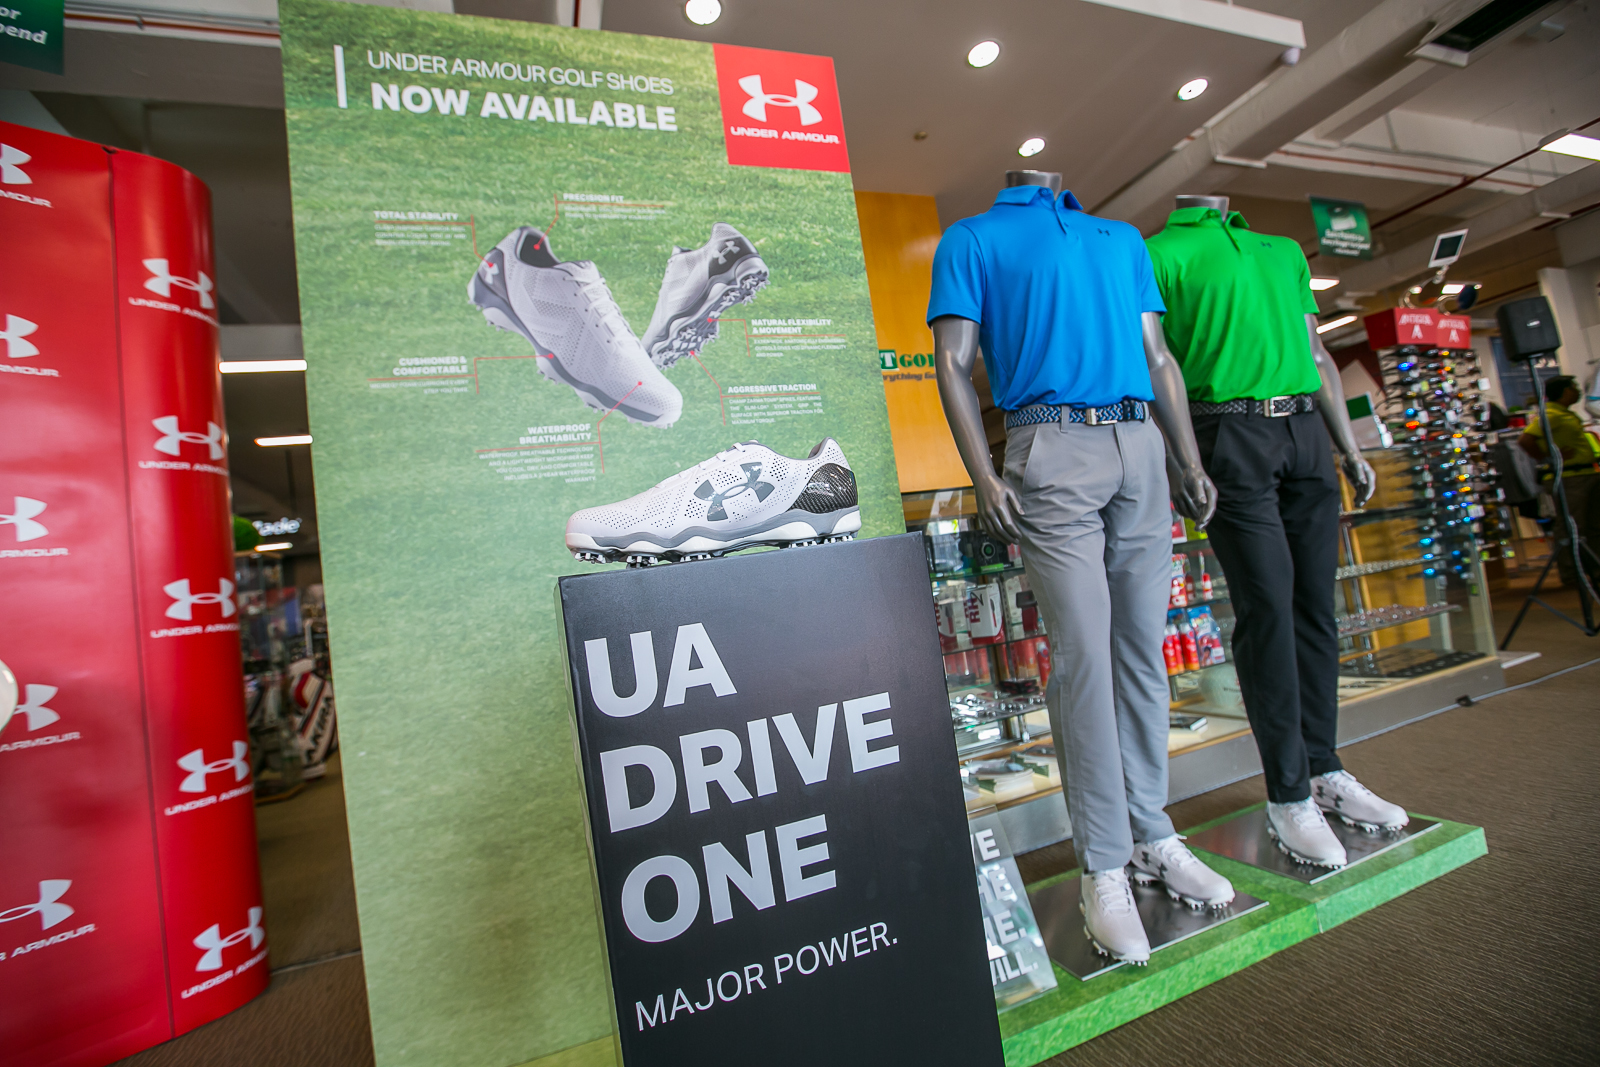 The UA Drive One was officially launched at MST Superstore Subang Jaya.